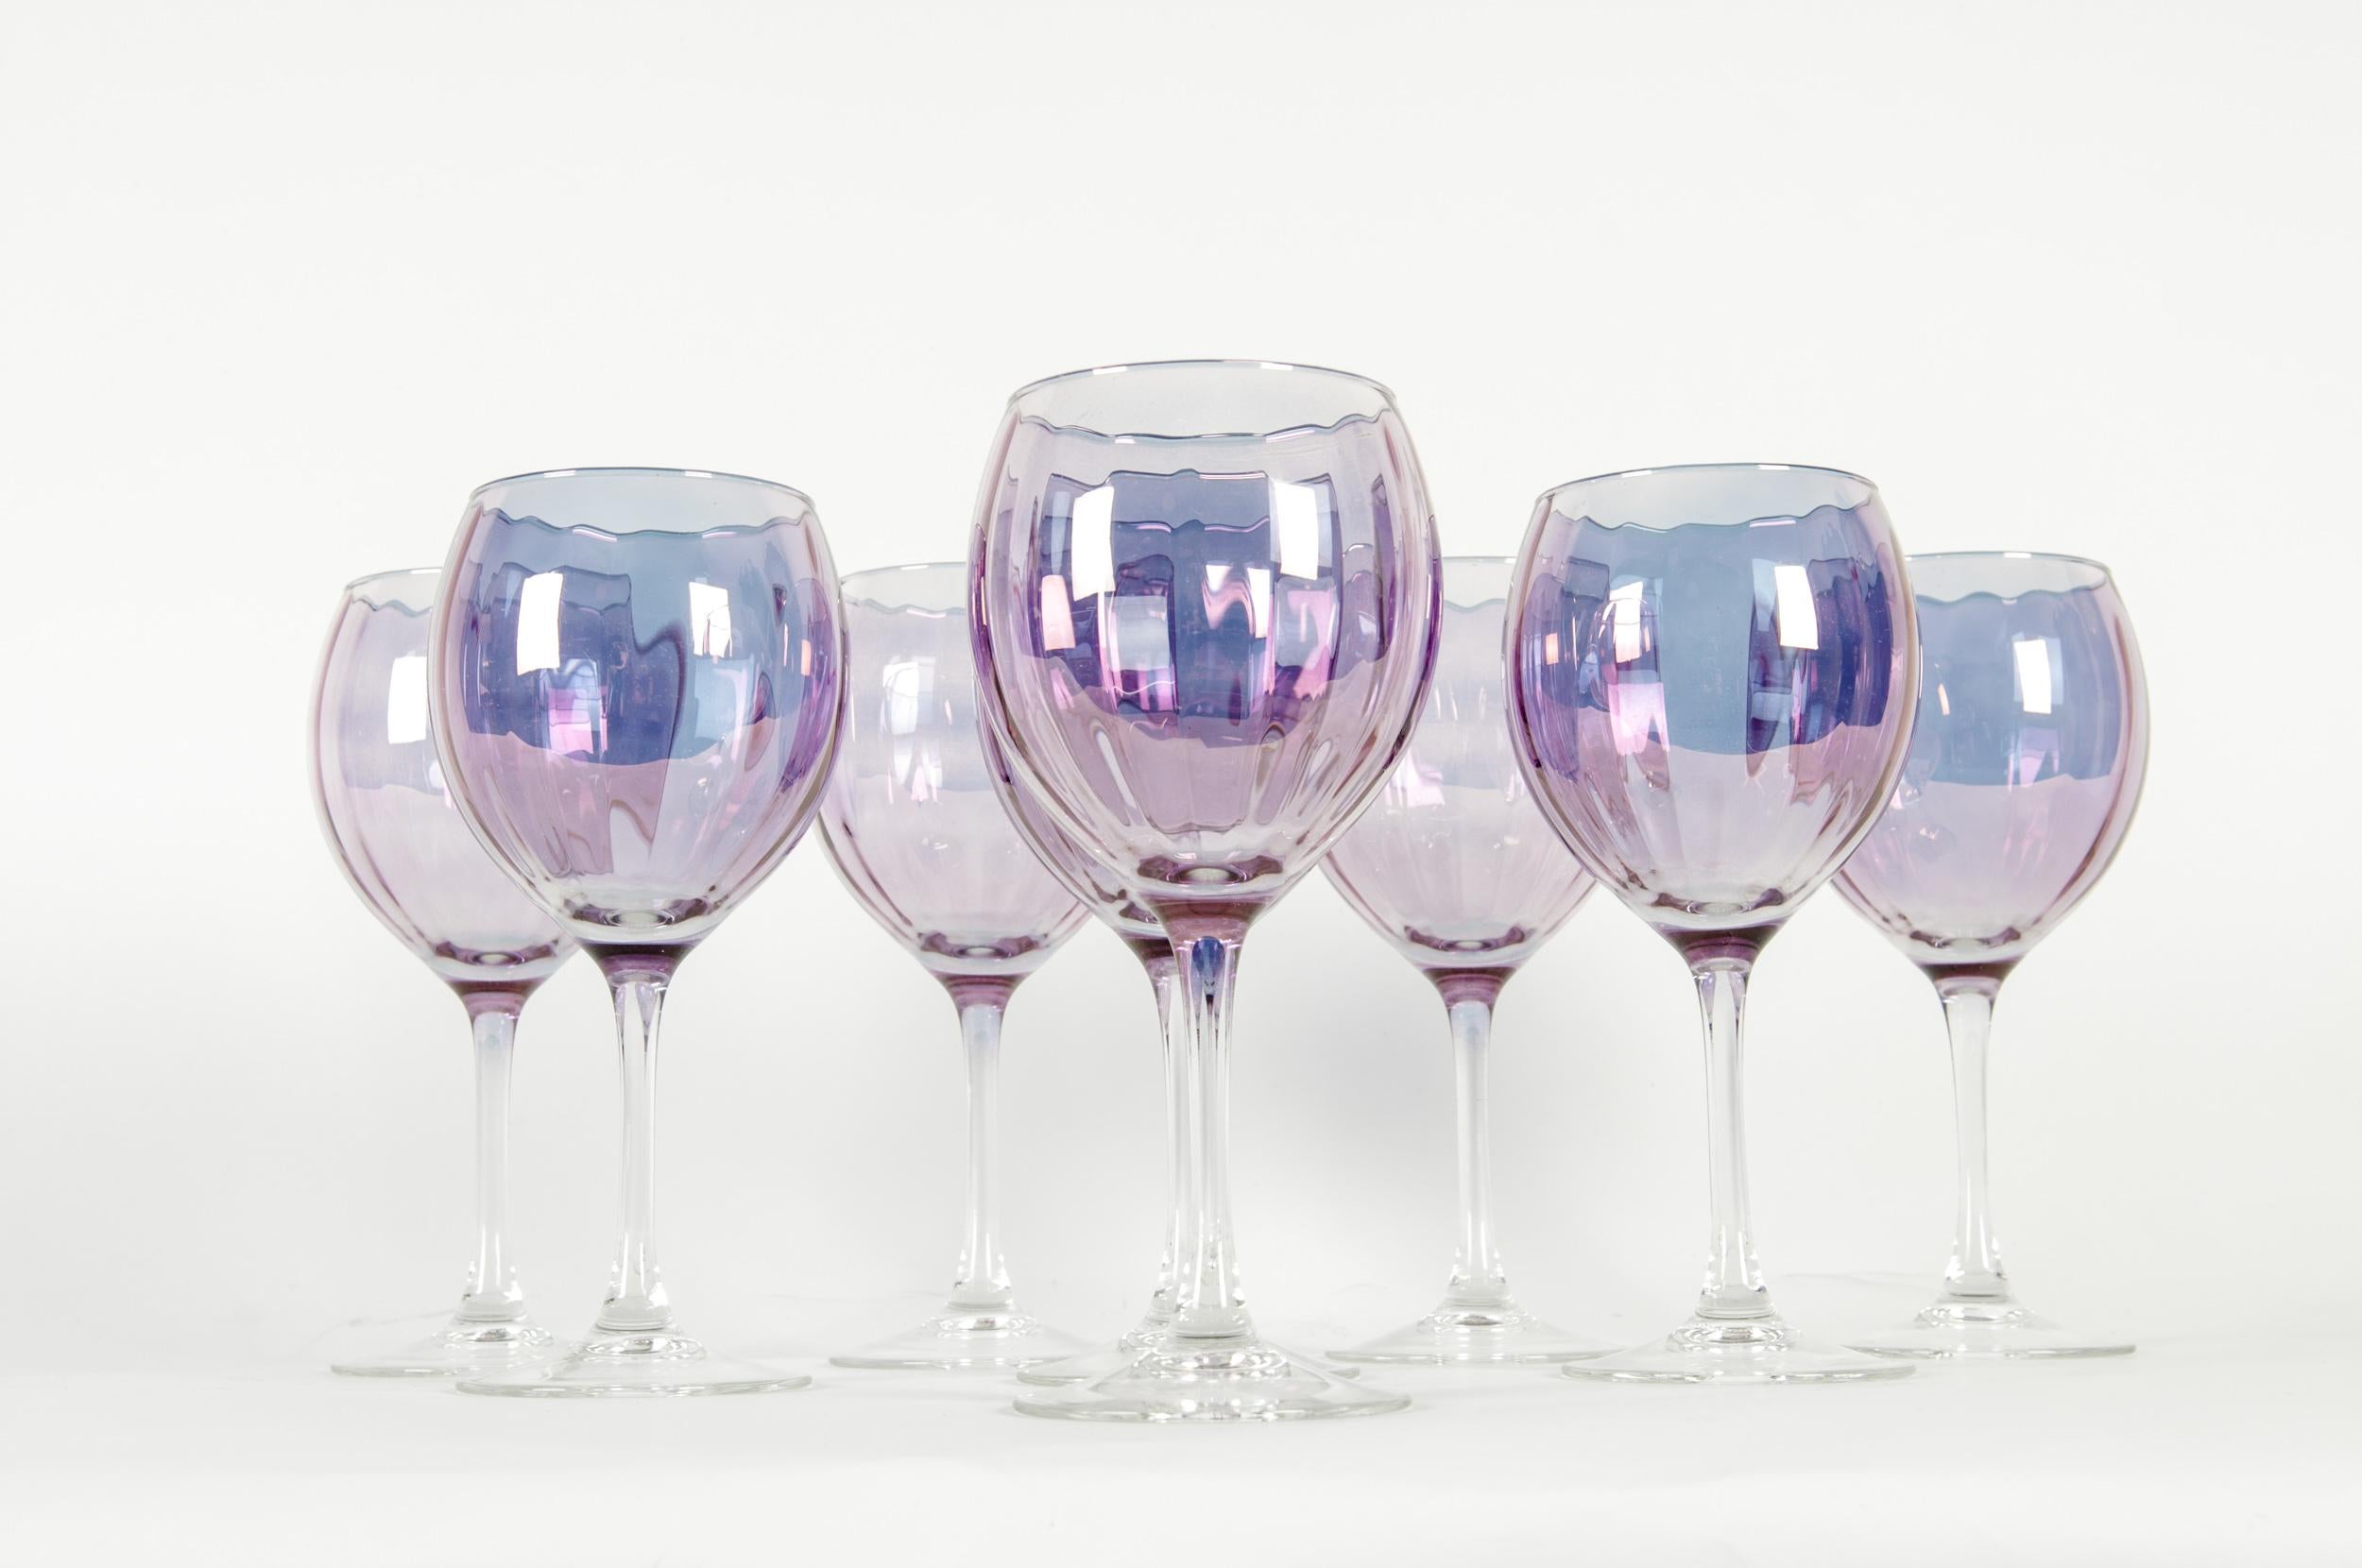 Mid-20th century French Iridescent barware / tableware wine, water glassware service for eight people. Each glass is in great vintage condition. Maker's mark underside. Each glass measure about 7.8 inches high x 3 inches diameter.